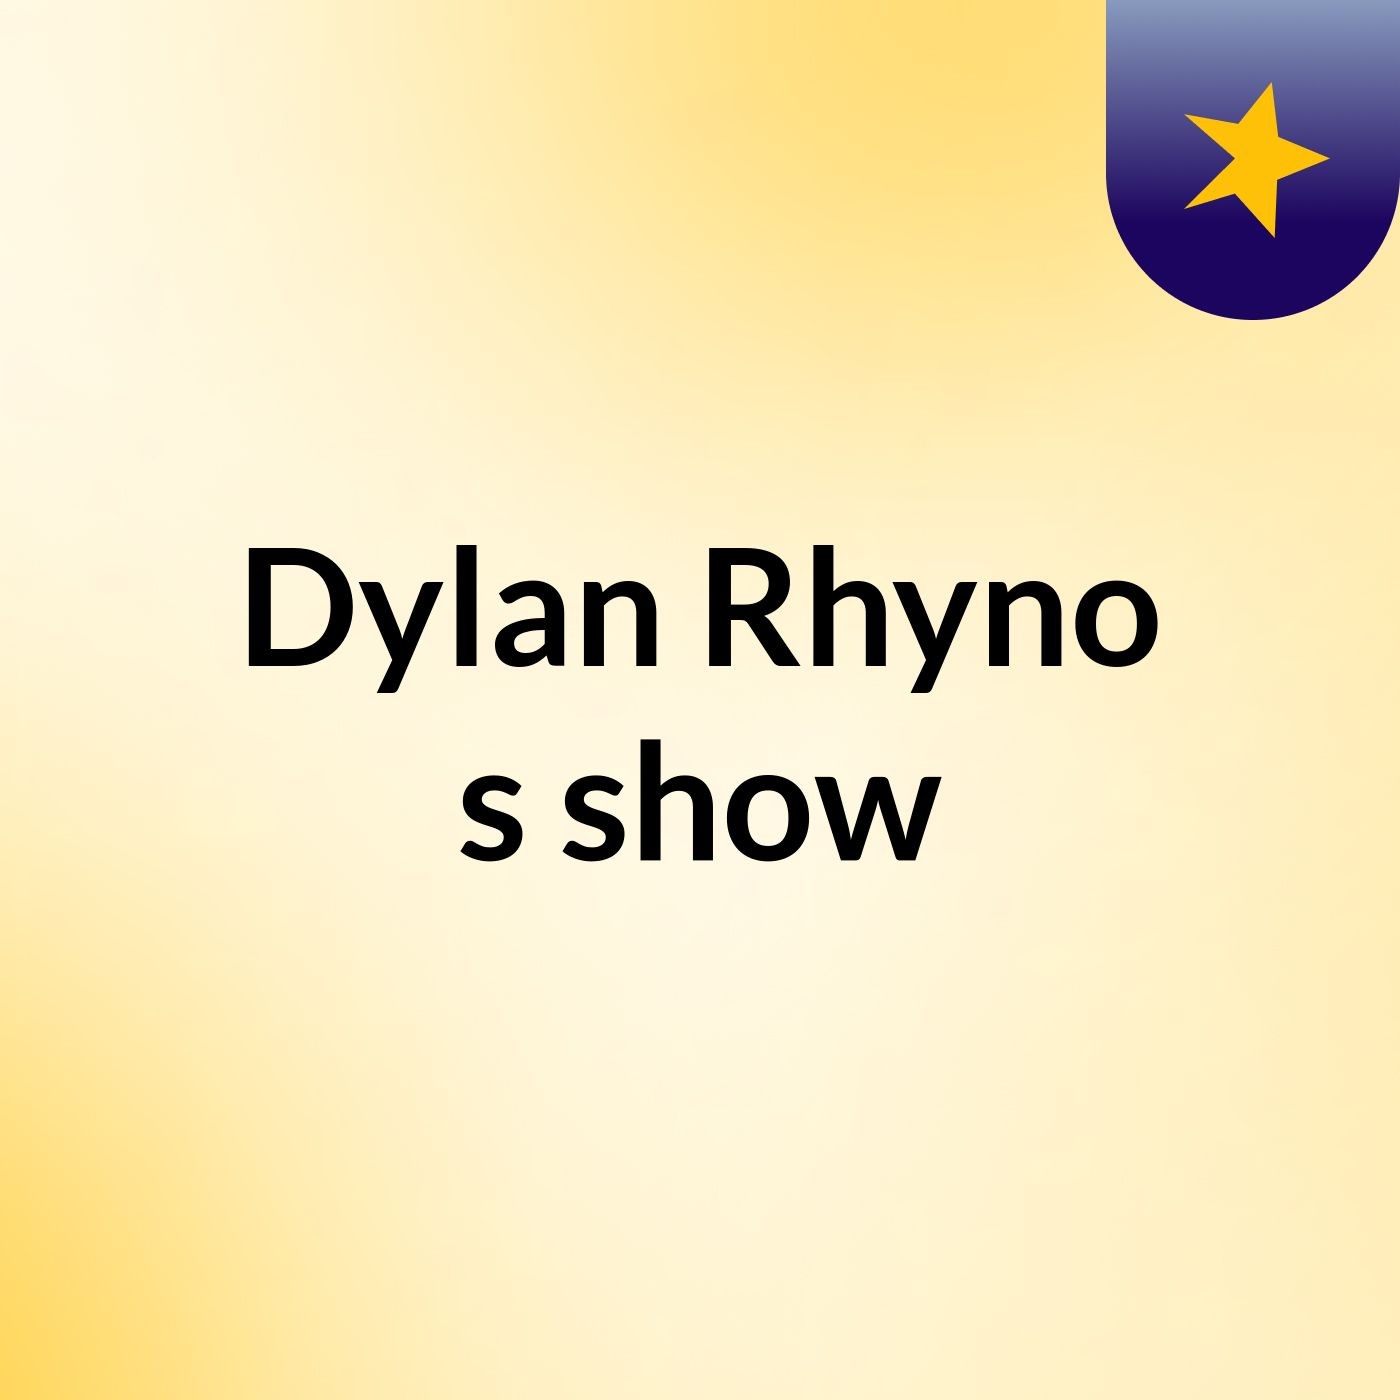 Dylan Rhyno's show